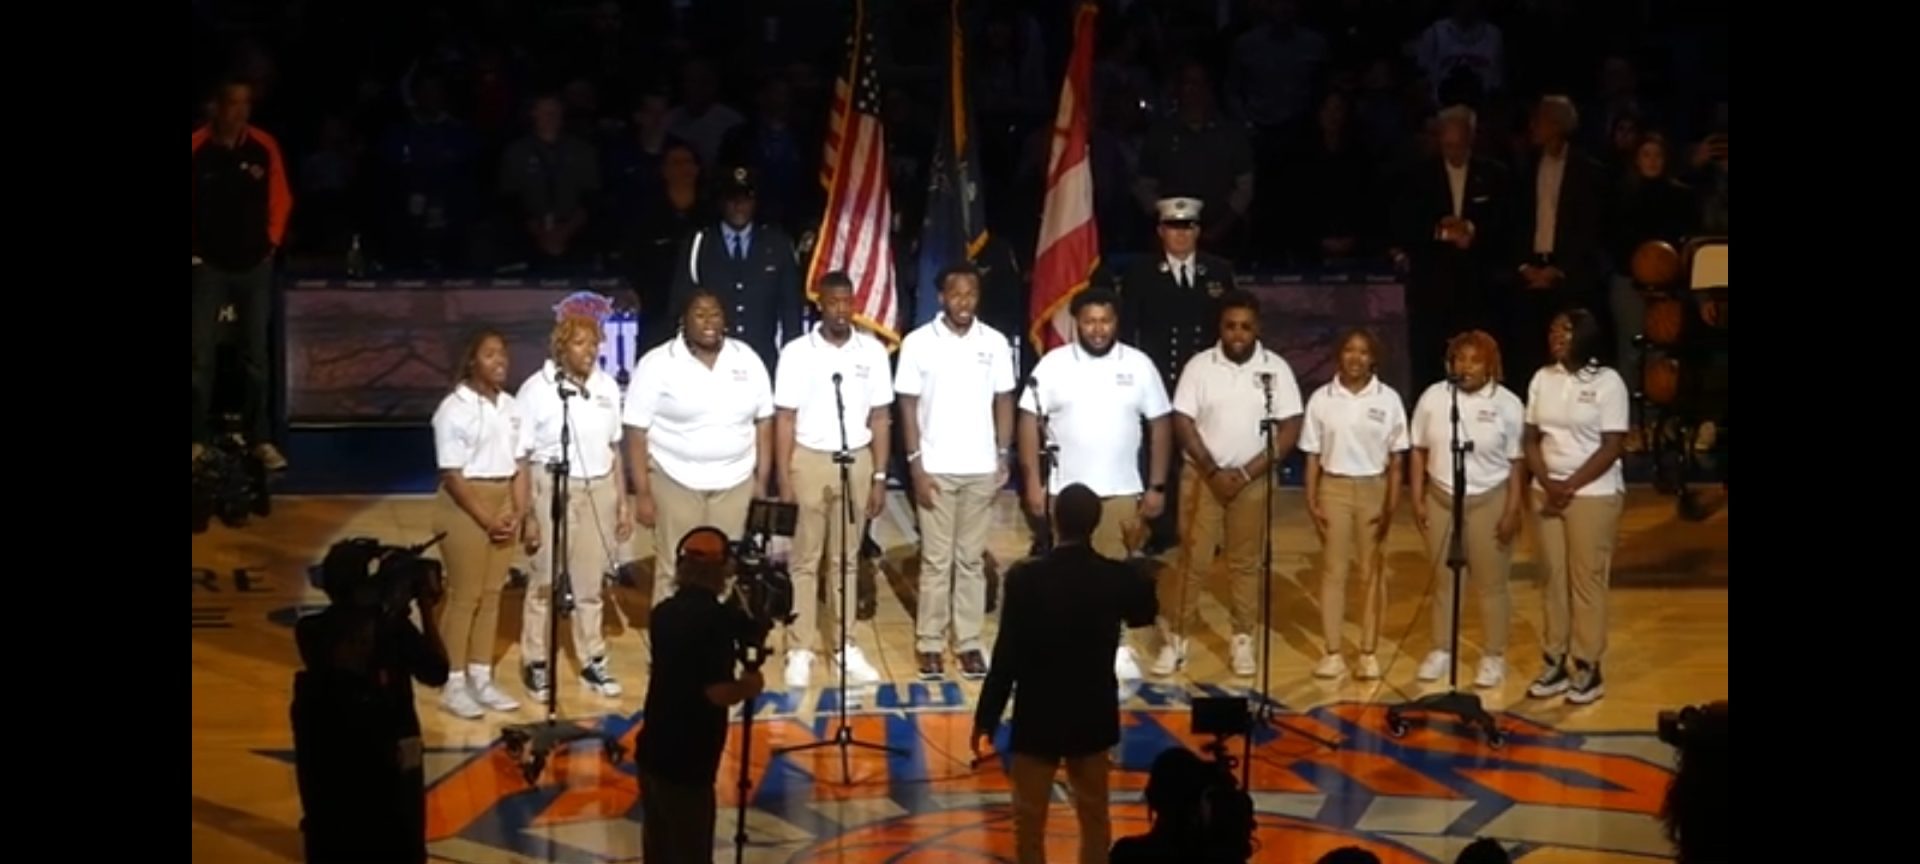 Morgan State University Choir performs at Madison Square Garden. (Photo by Derrel Jazz Johnson for rolling out.)